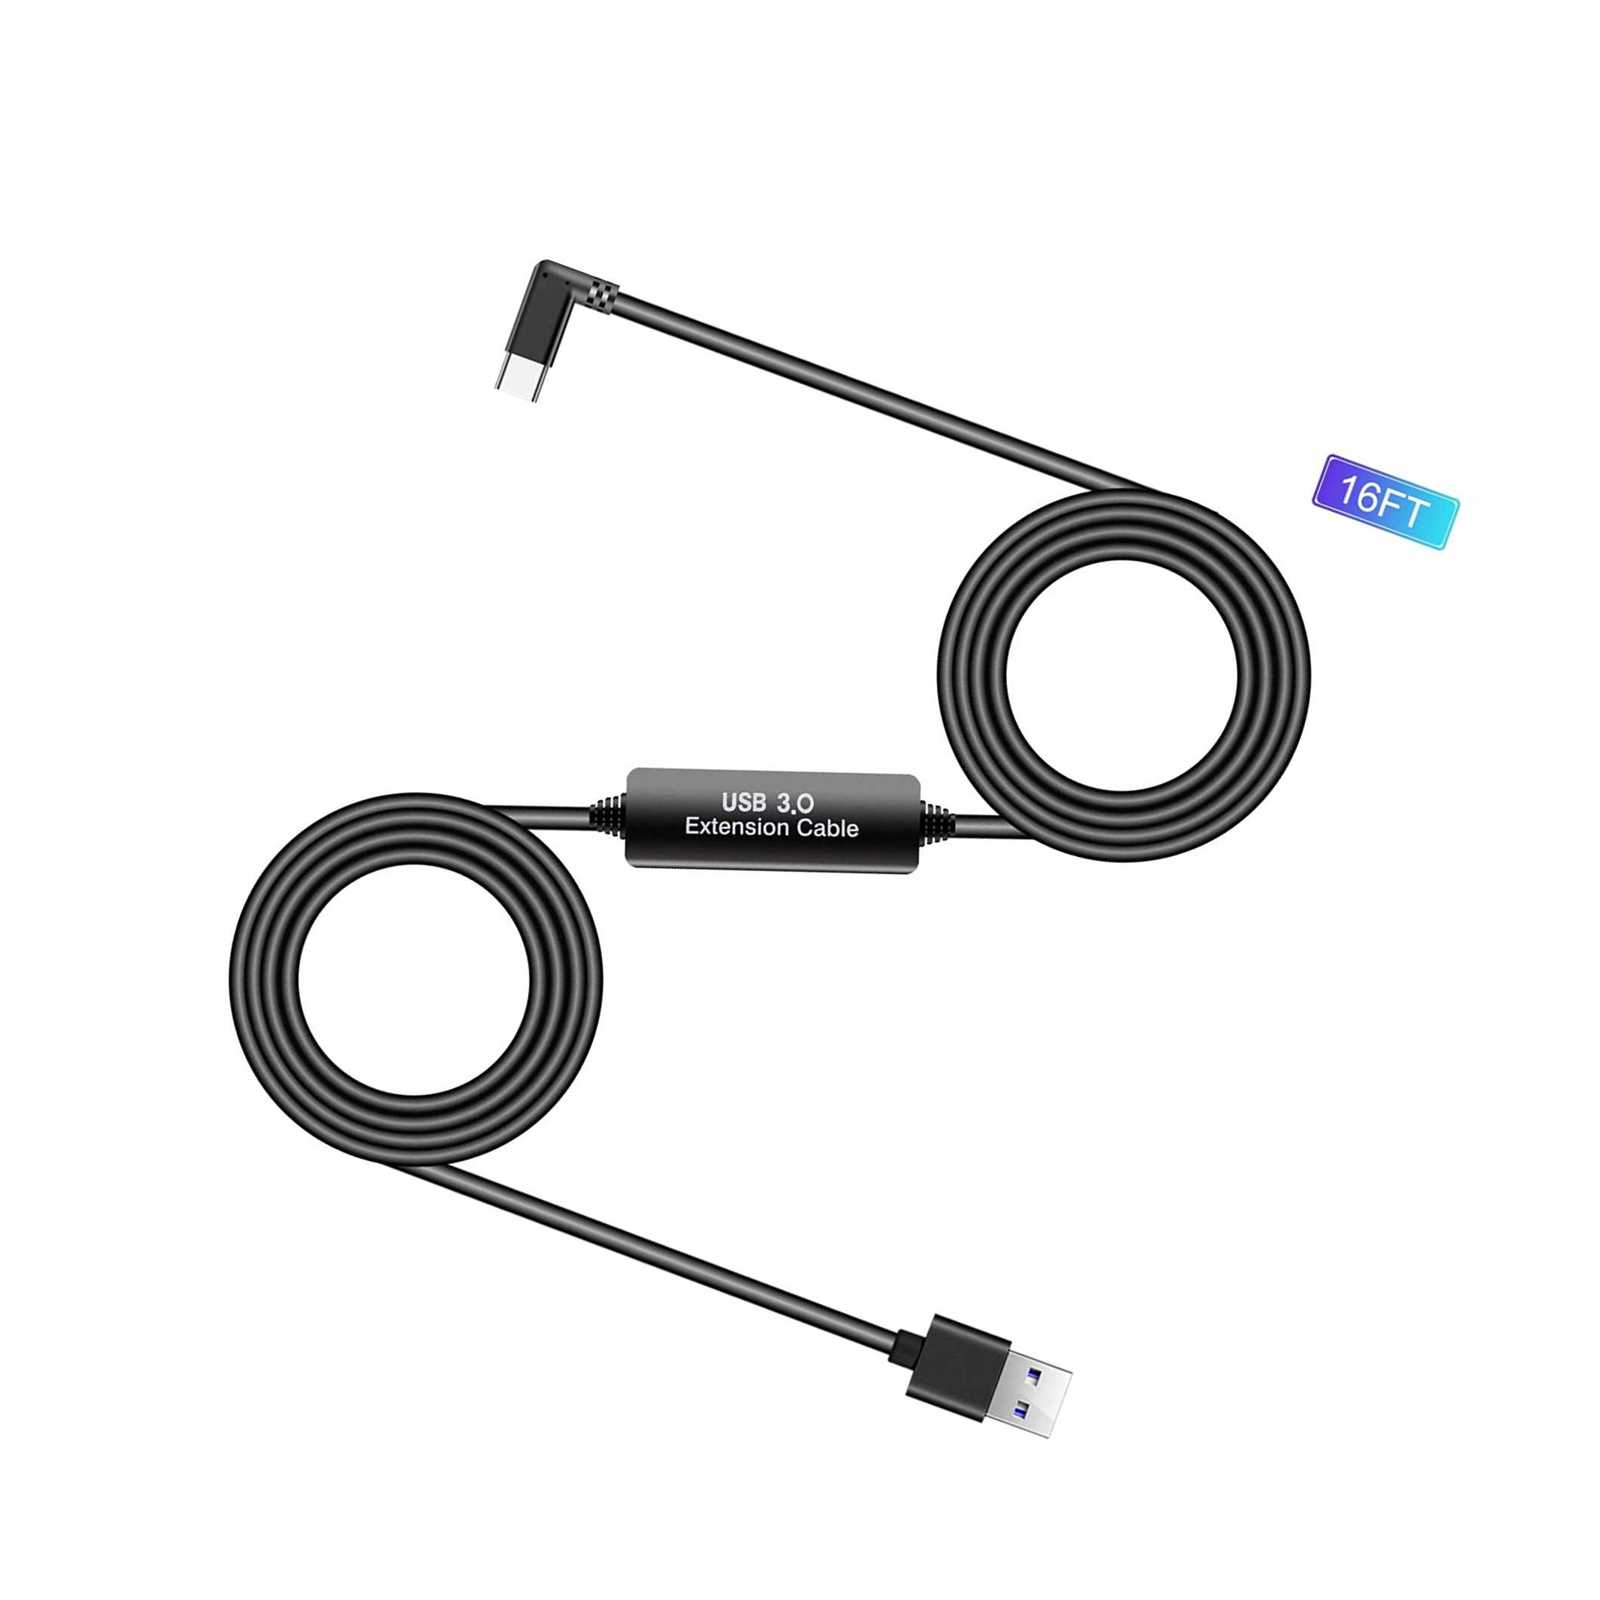 Oculus Quest Cable 16Ft, Usb 3.2 Gen1, Usb C To A, High Speed Data Transfer W